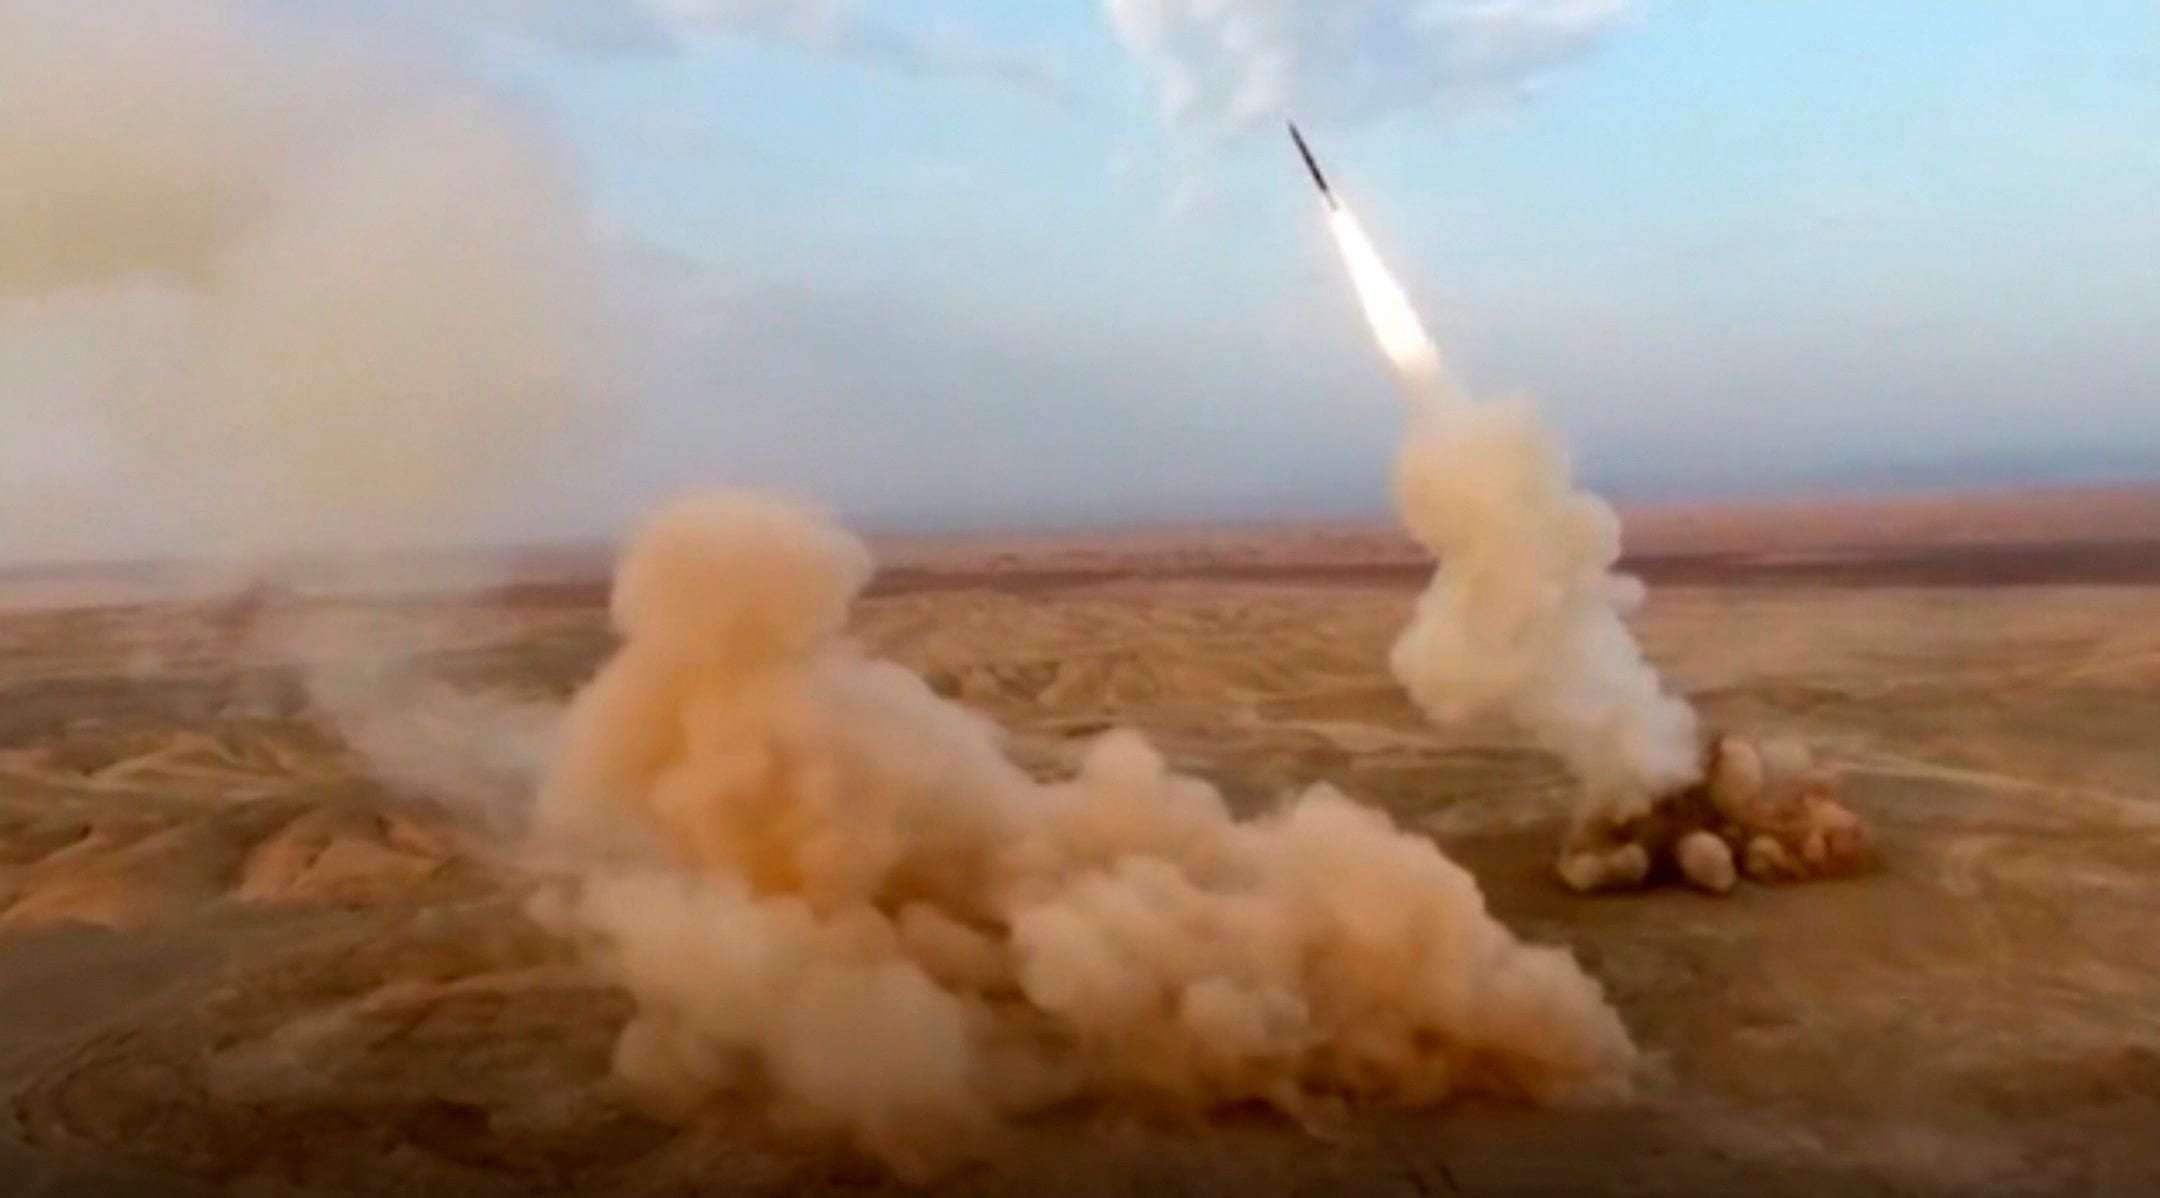 image for At Least Half Of Iranian Ballistic Missiles Failed Or Crashed Prematurely